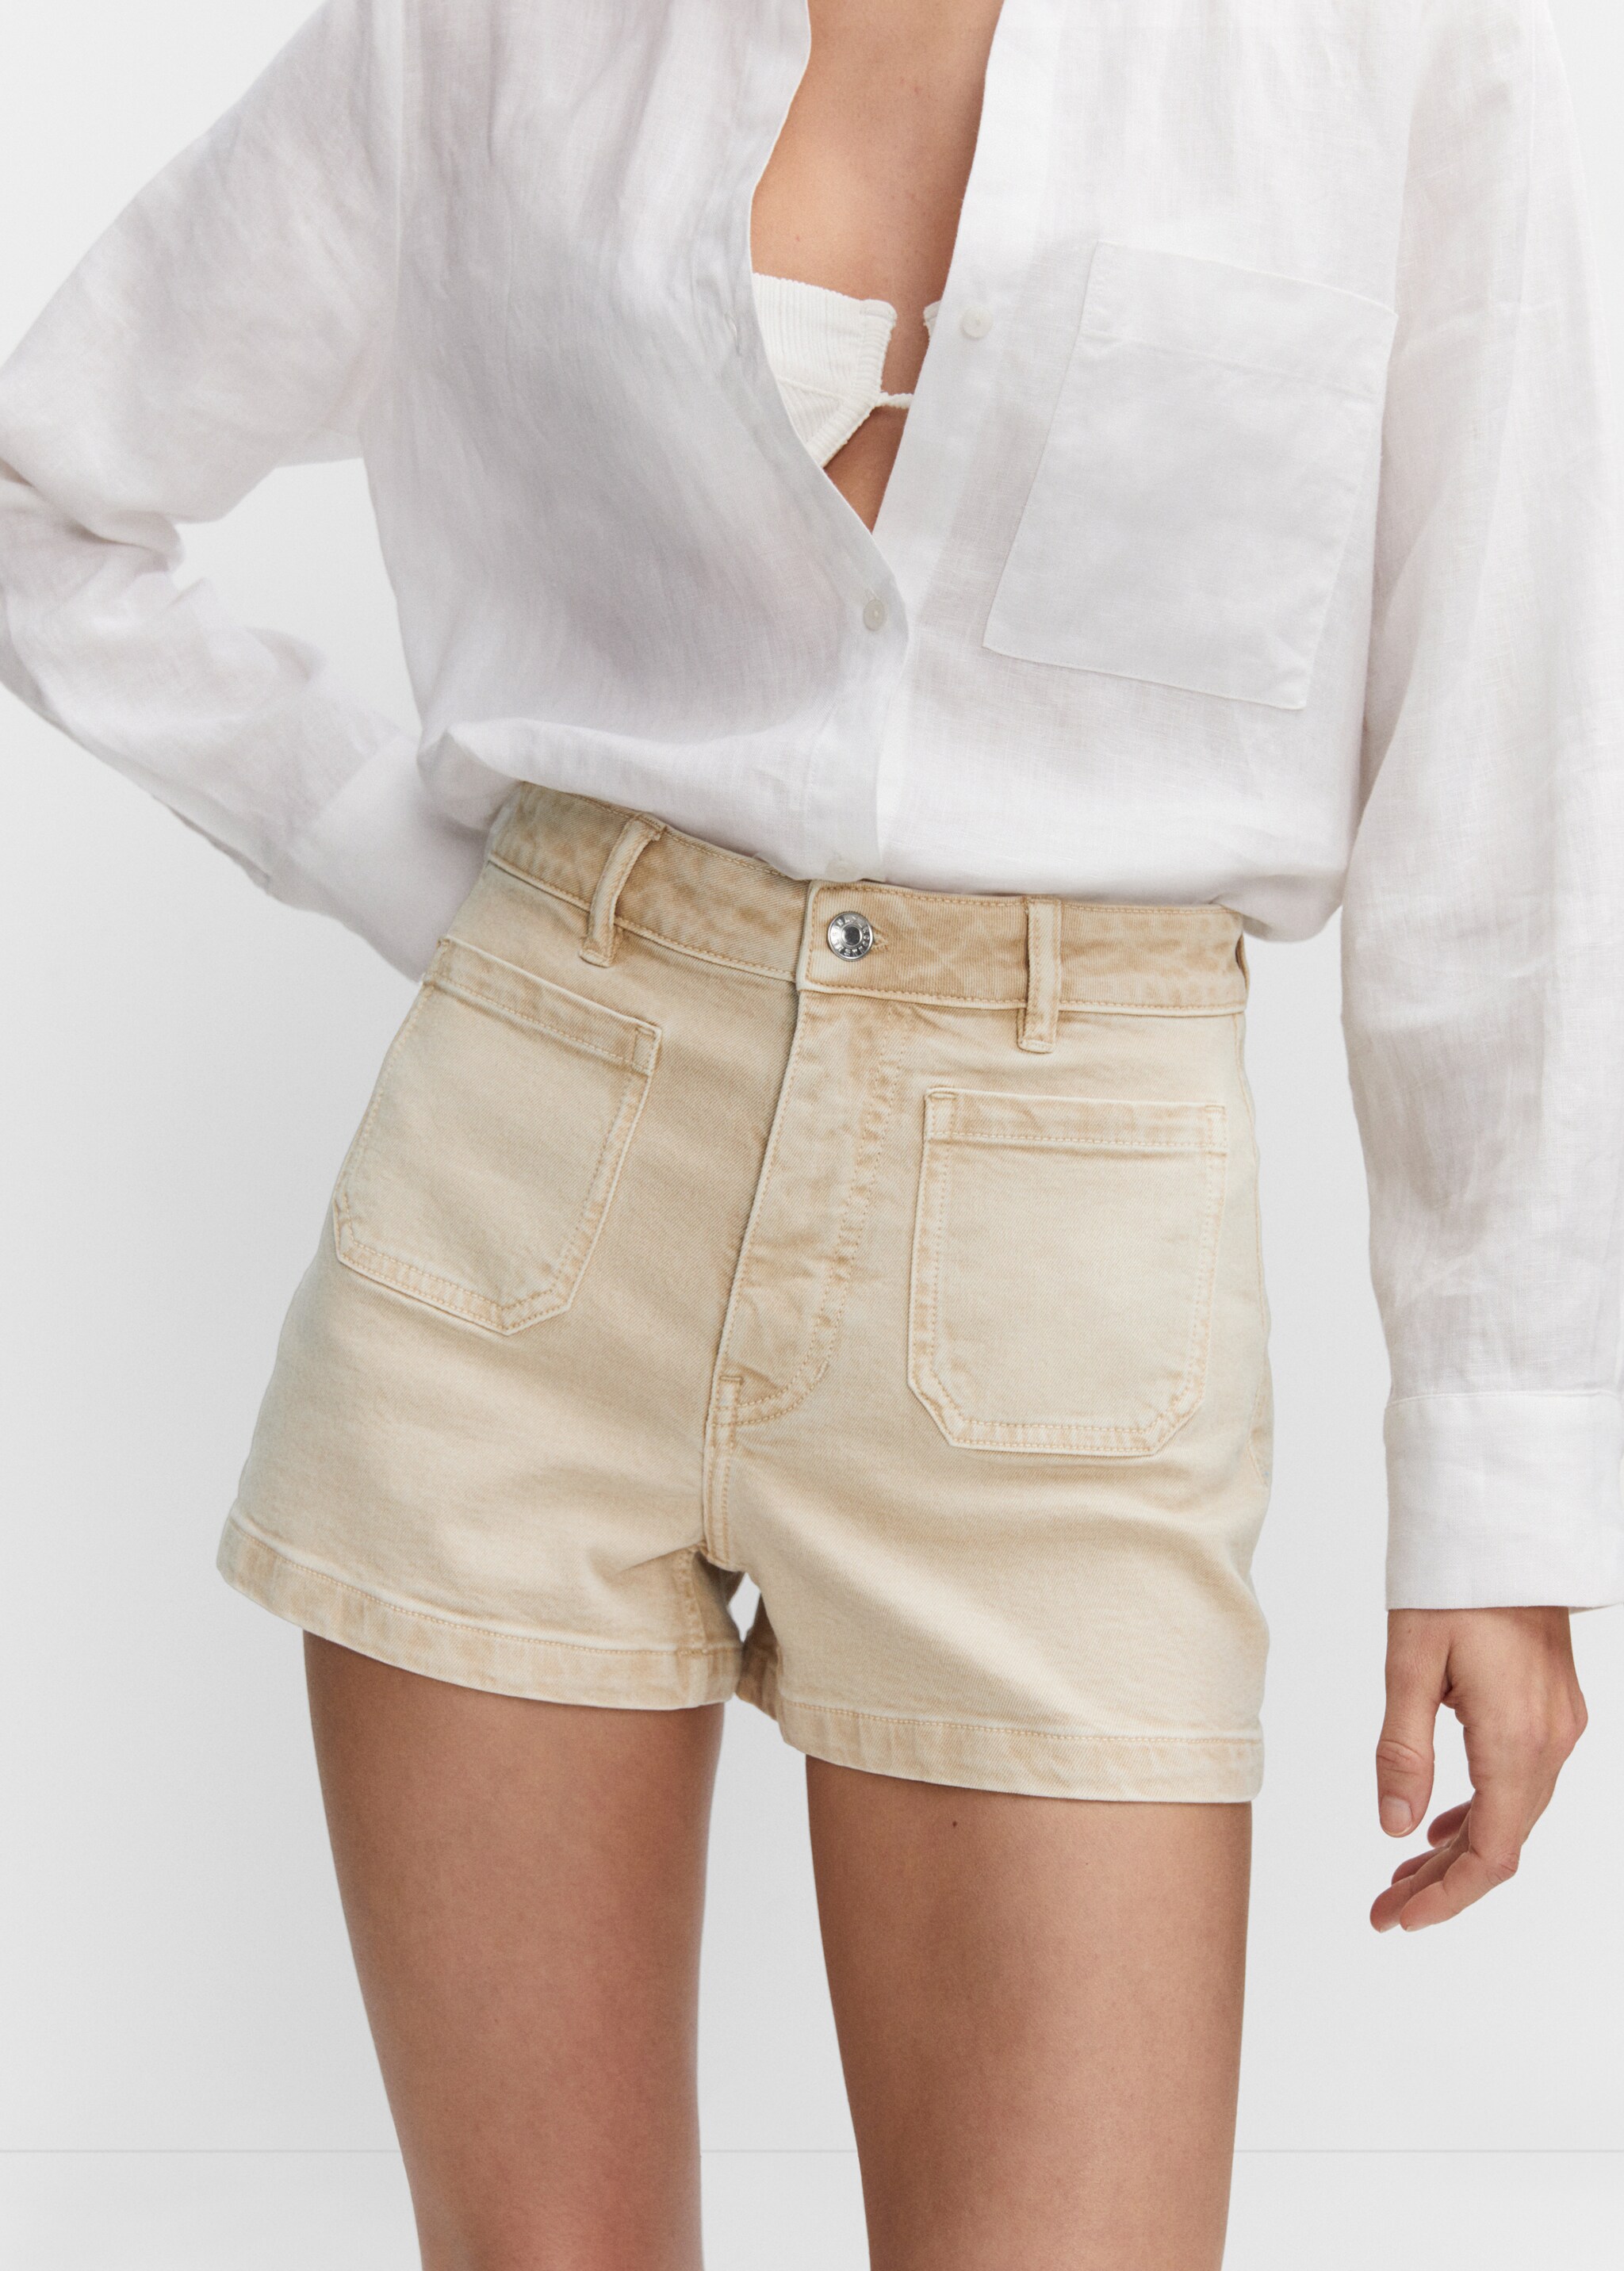 Denim shorts with pockets - Details of the article 6